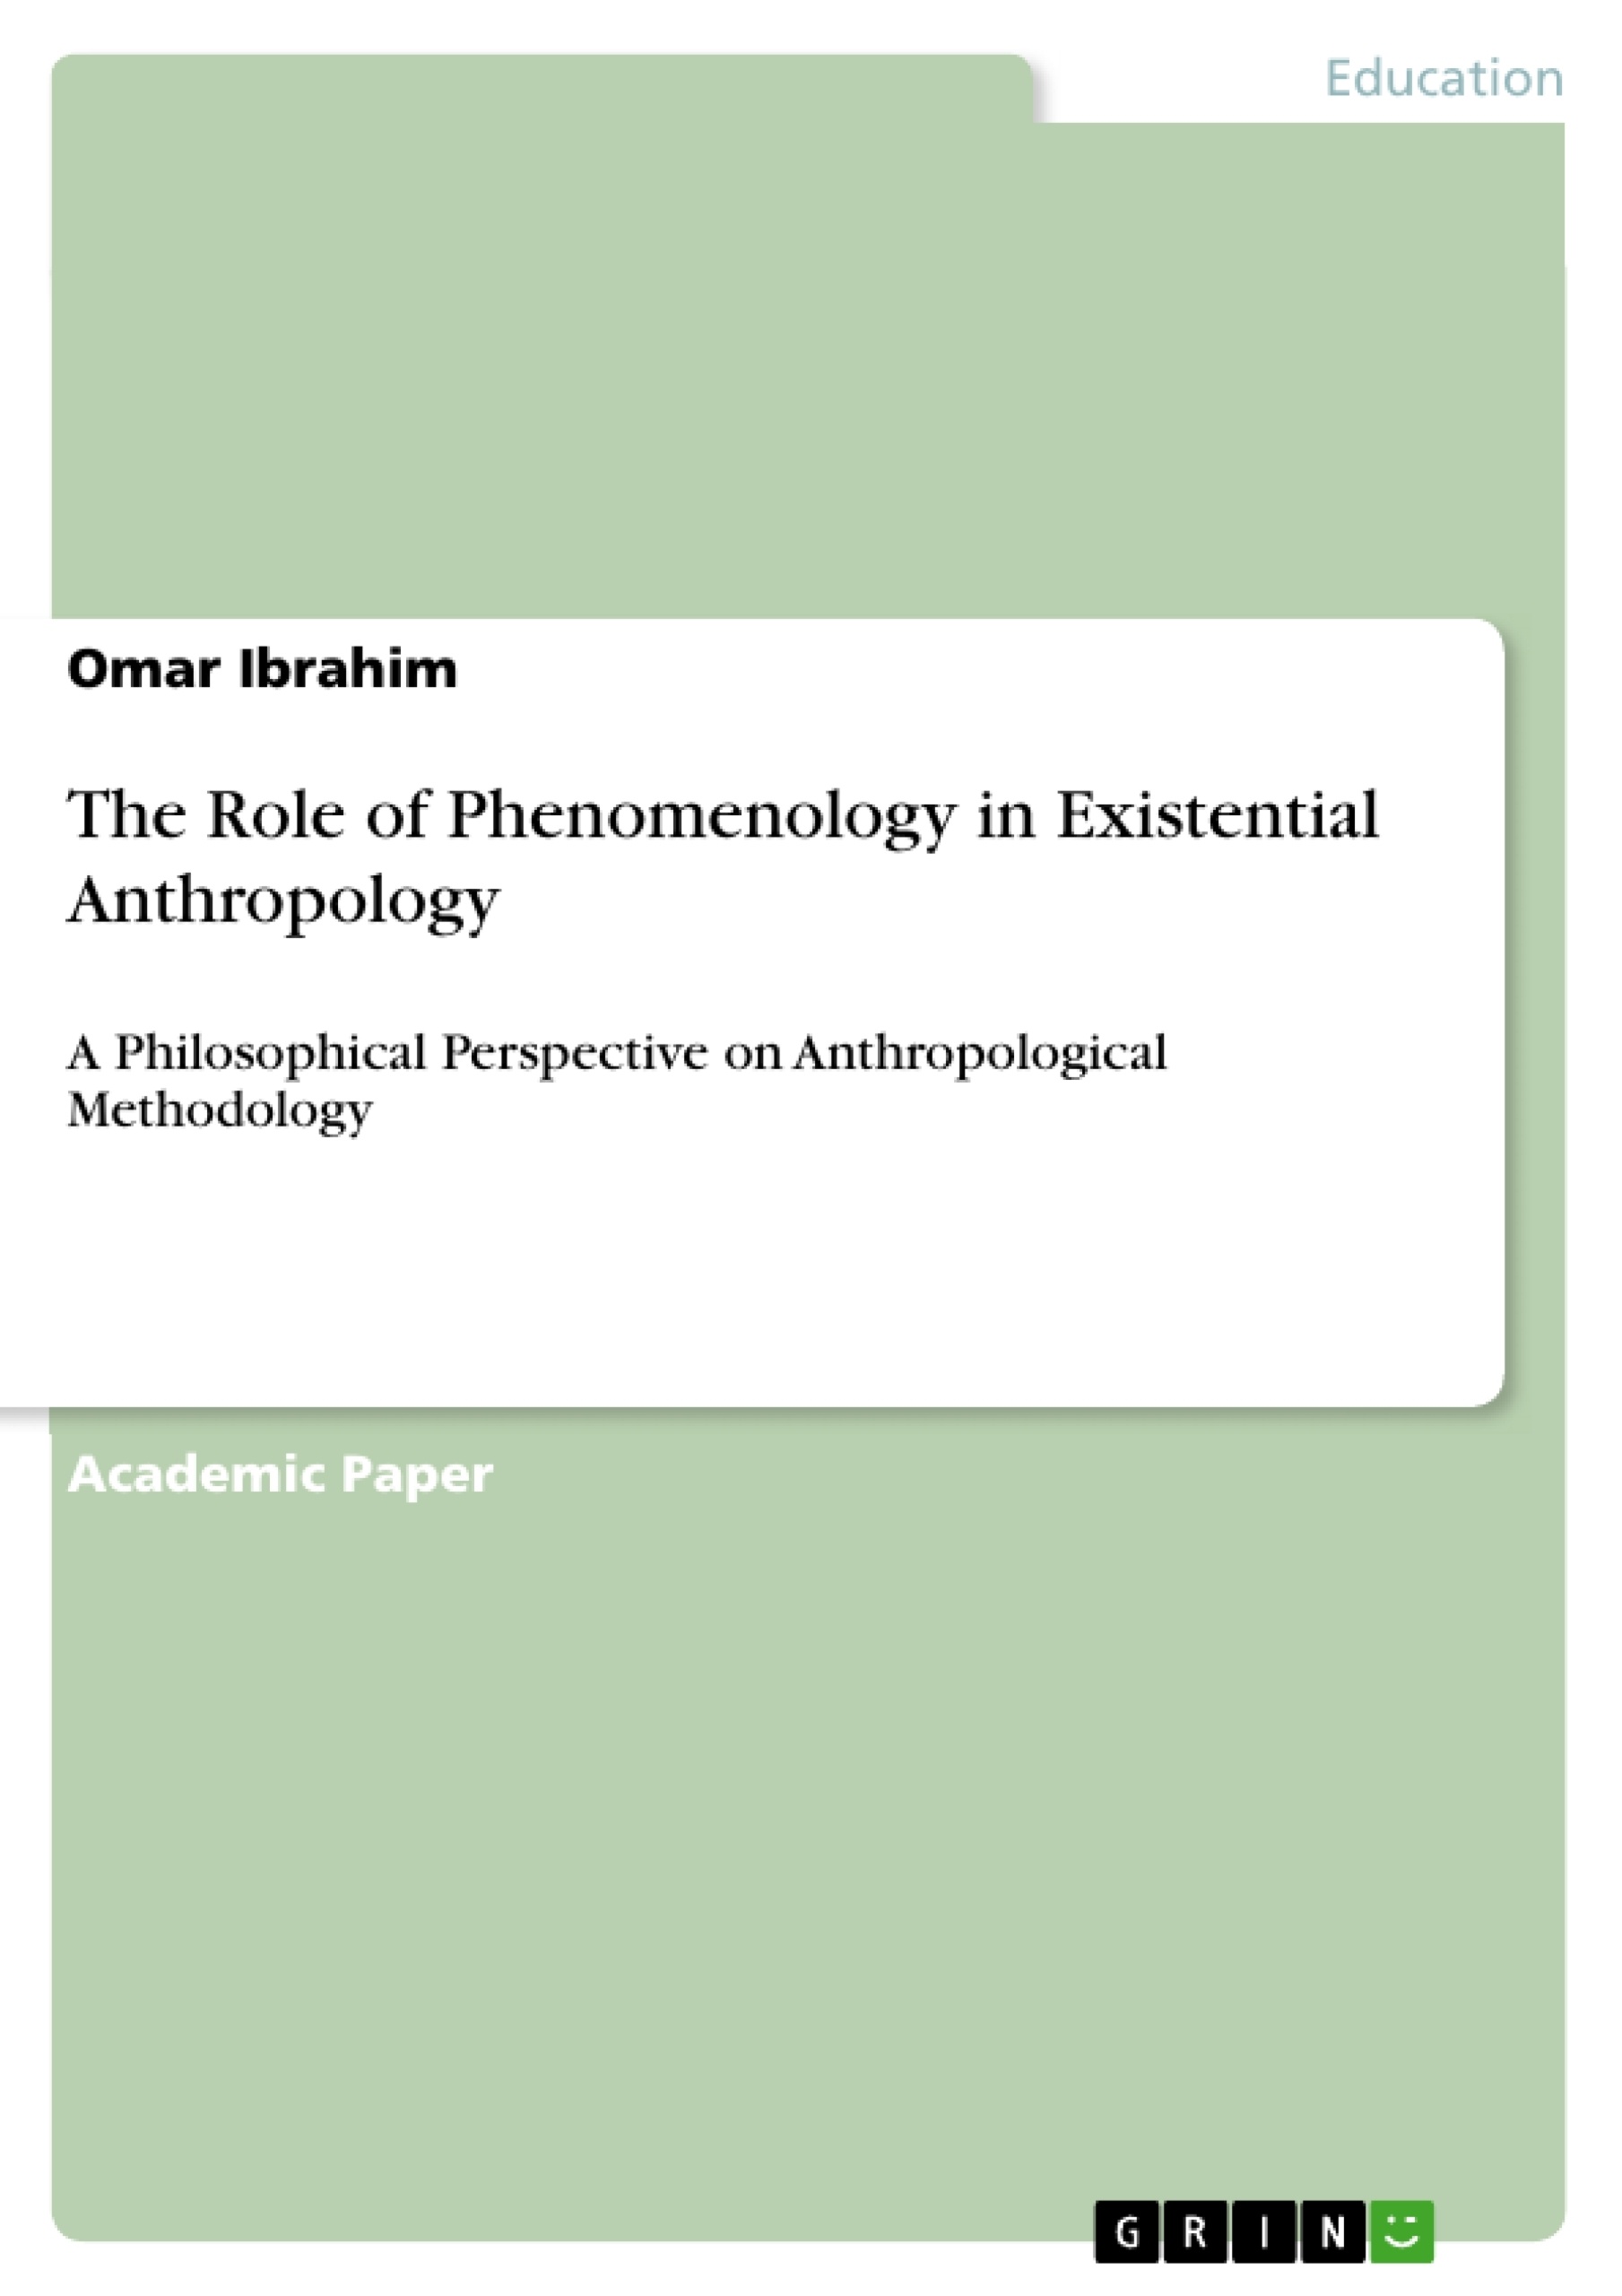 Título: The Role of Phenomenology in Existential Anthropology